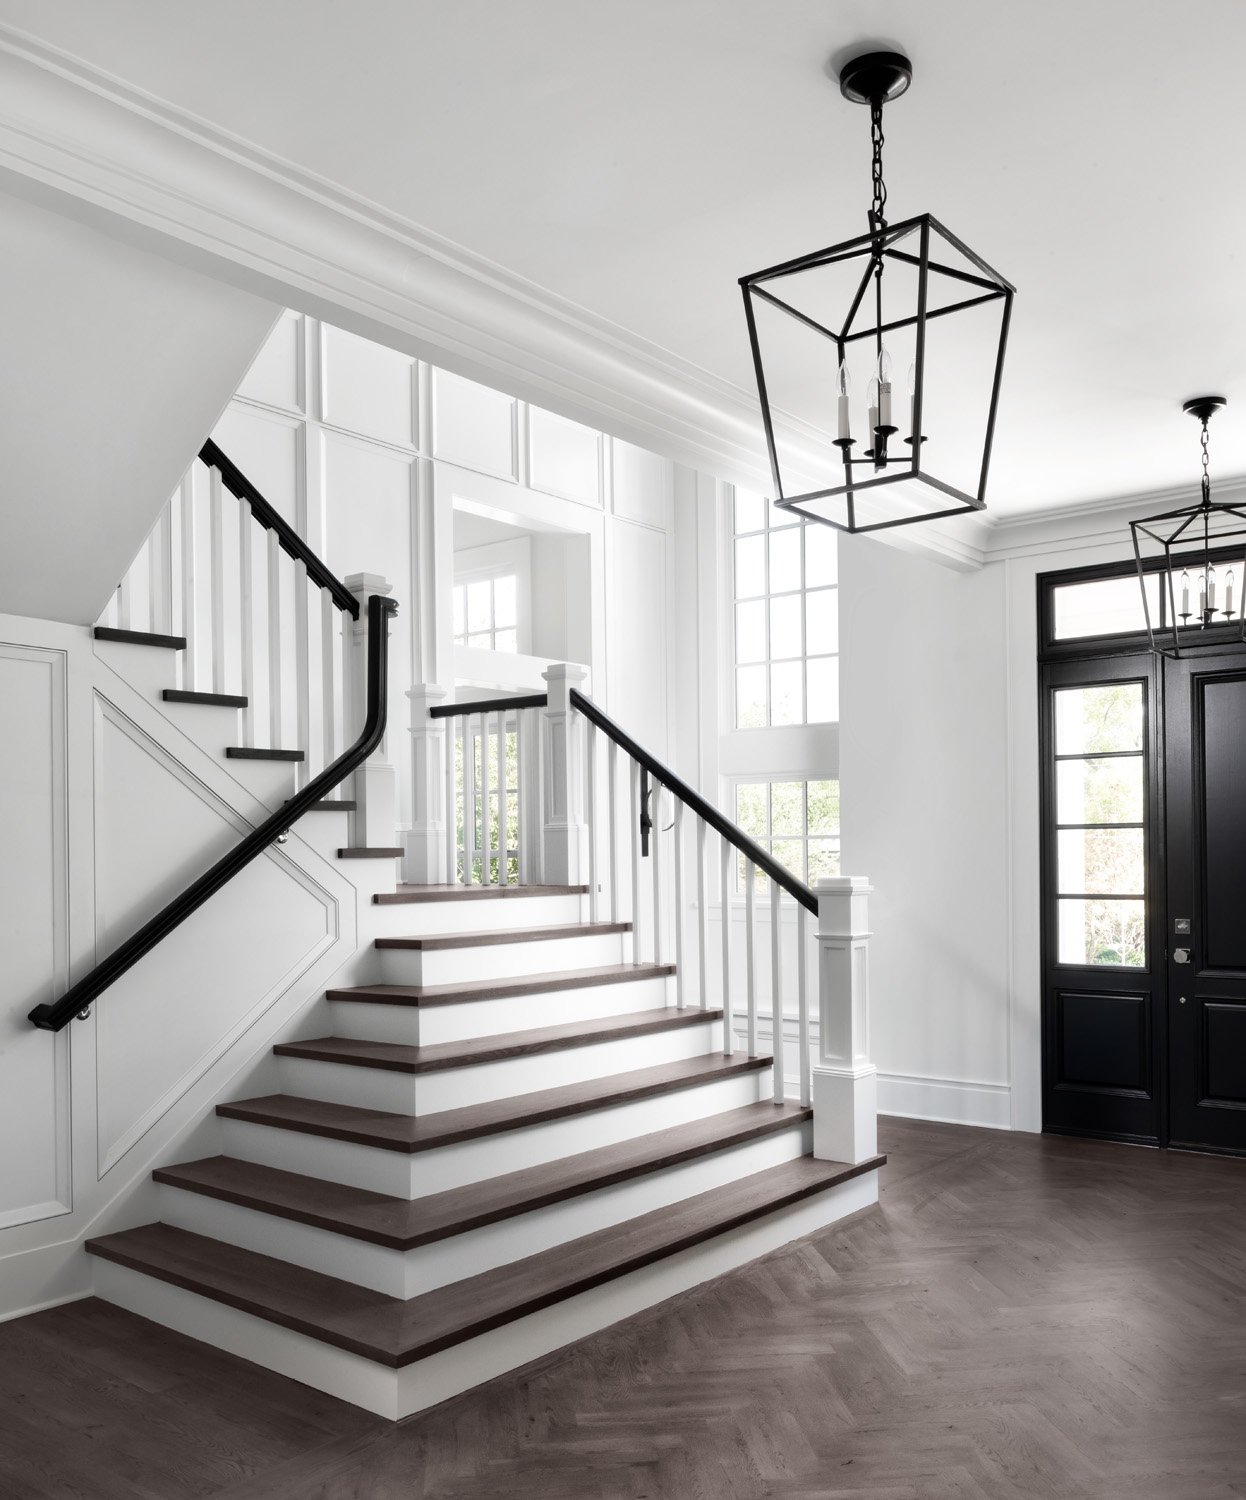 Foyer - View to Formal Stairs.jpg